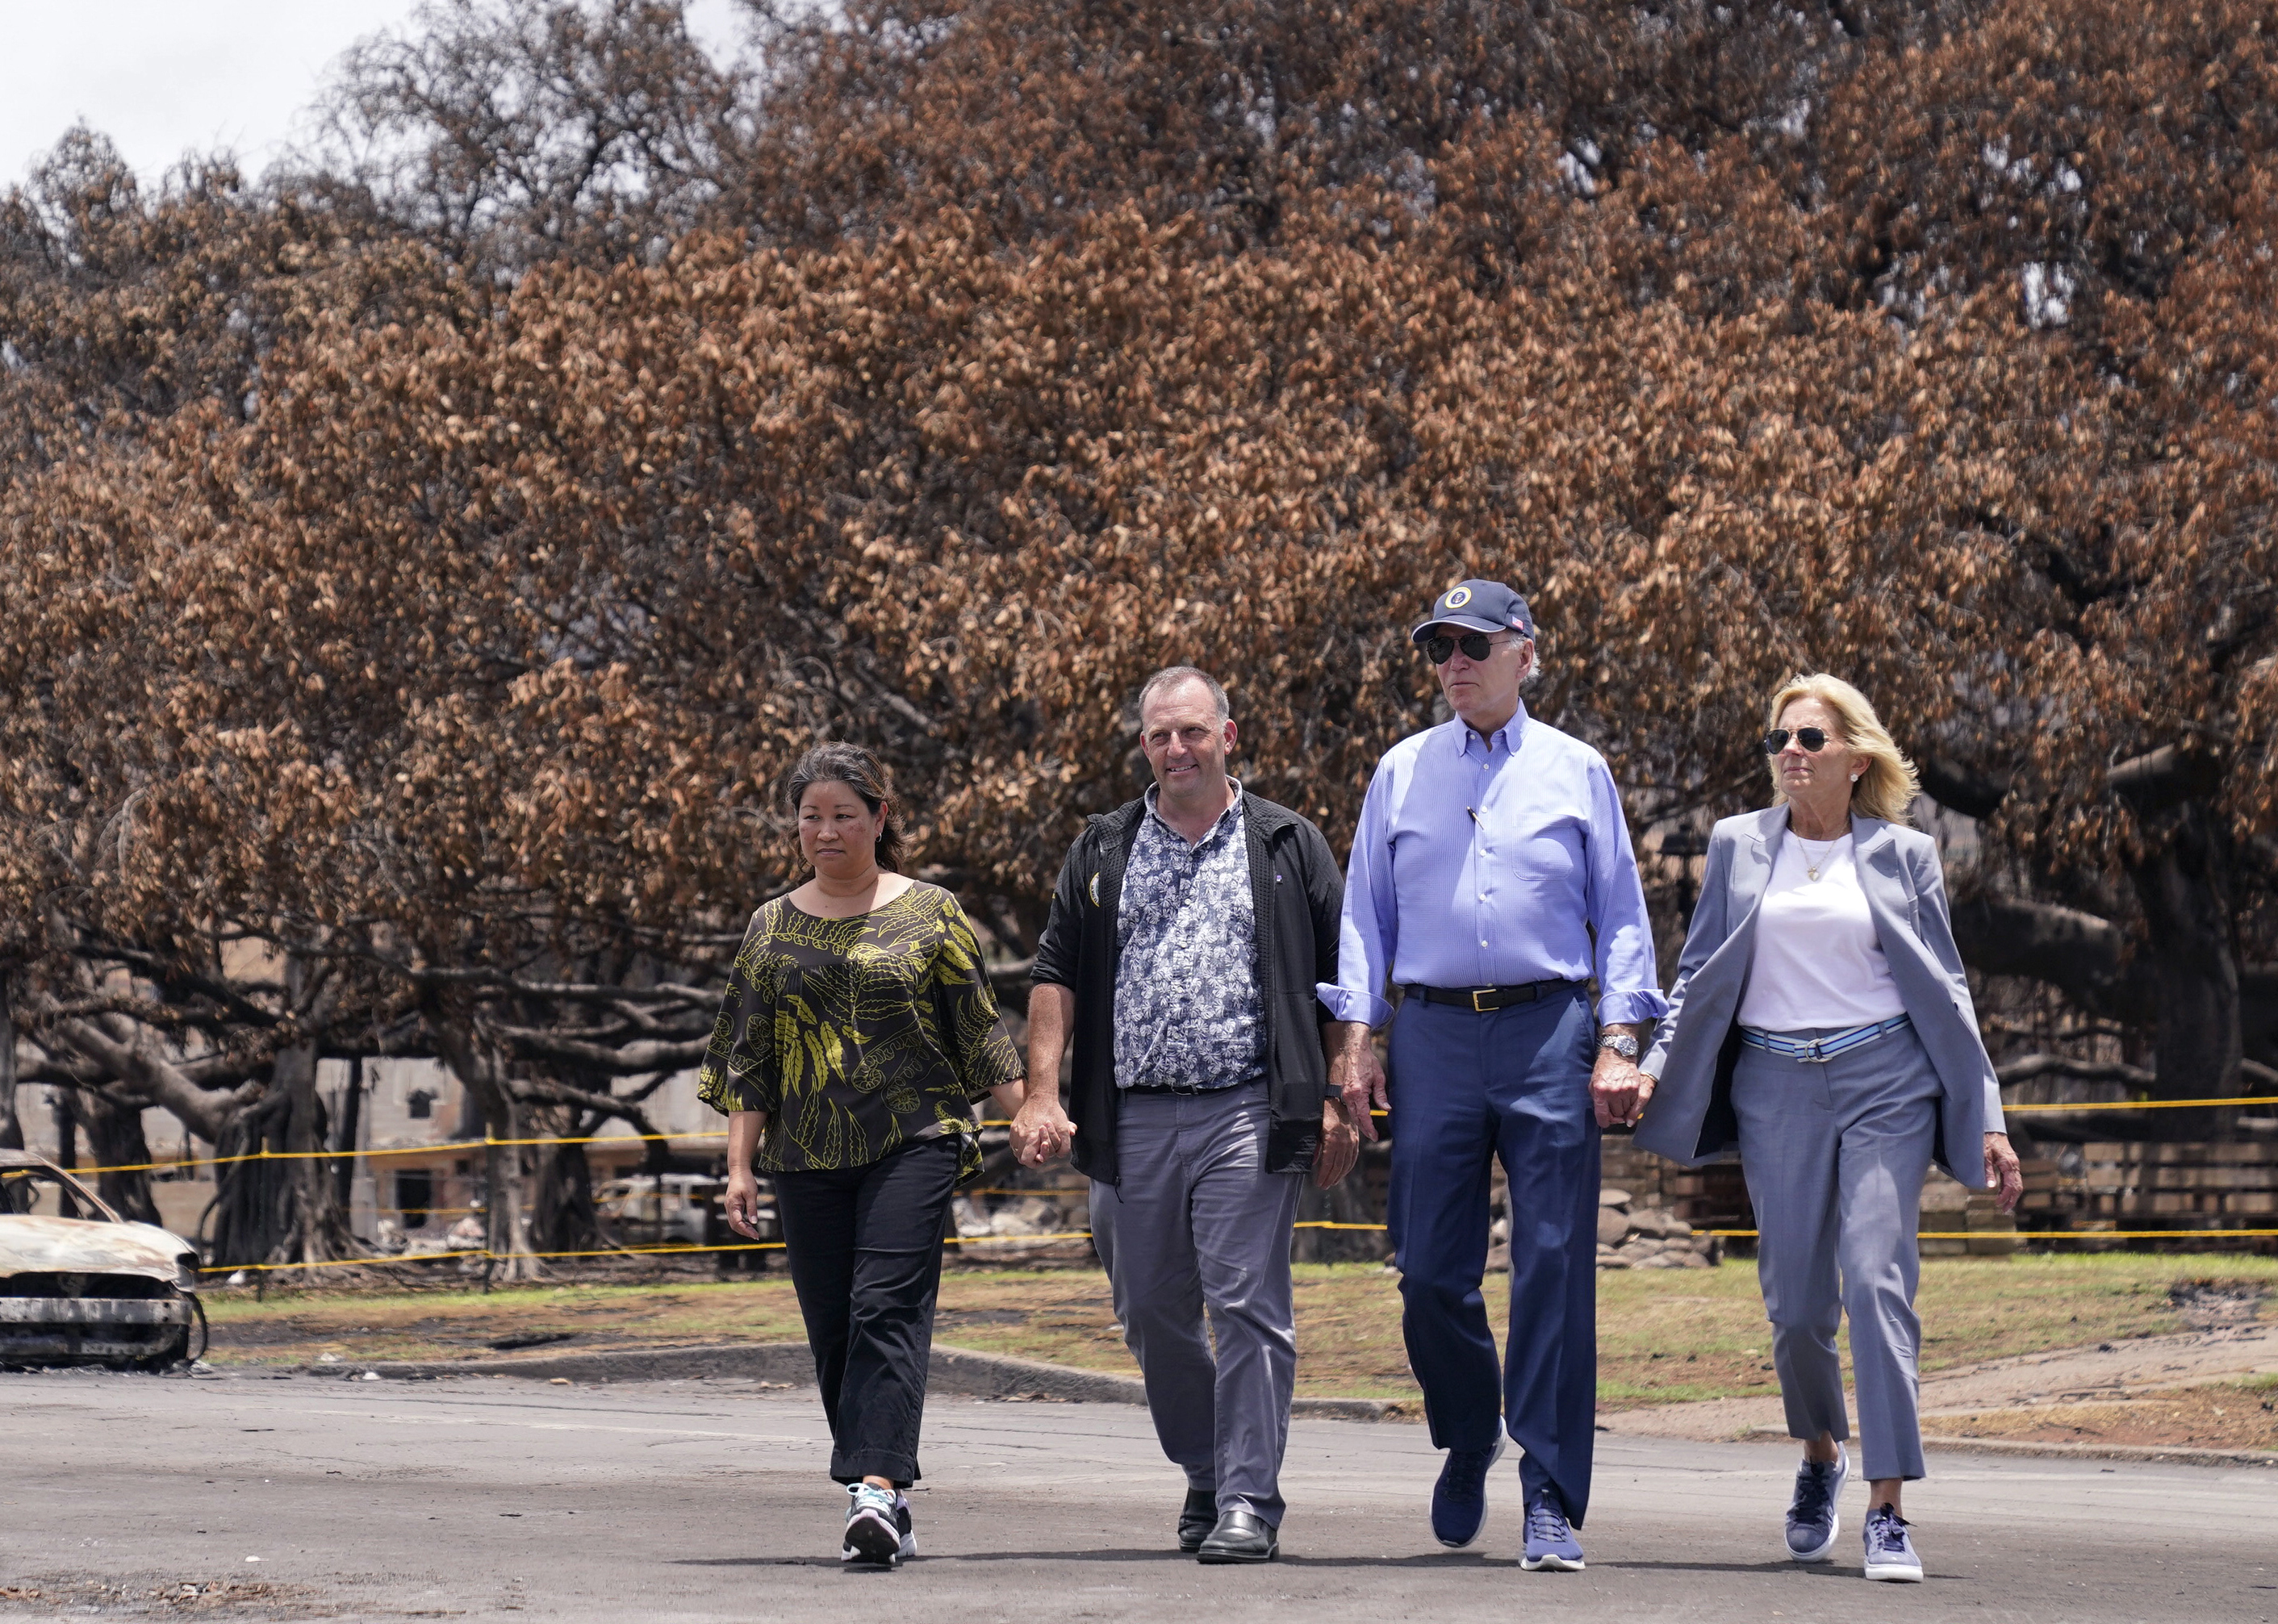 FILE - President Joe Biden, second right, and first lady Jill Biden, right, walk with Hawaii Gov. Josh Green, second from left, and his wife Jaime Green, Aug. 21, 2023, in Lahaina, Hawaii. David Letterman will headline a fundraiser with Biden in on July 29, 2024, at Green's home, a person familiar with the plans told The Associated Press. That's a sign that his campaign is forging ahead despite continued calls for the president to bow out of the 2024 race. (AP Photo/Evan Vucci, File)